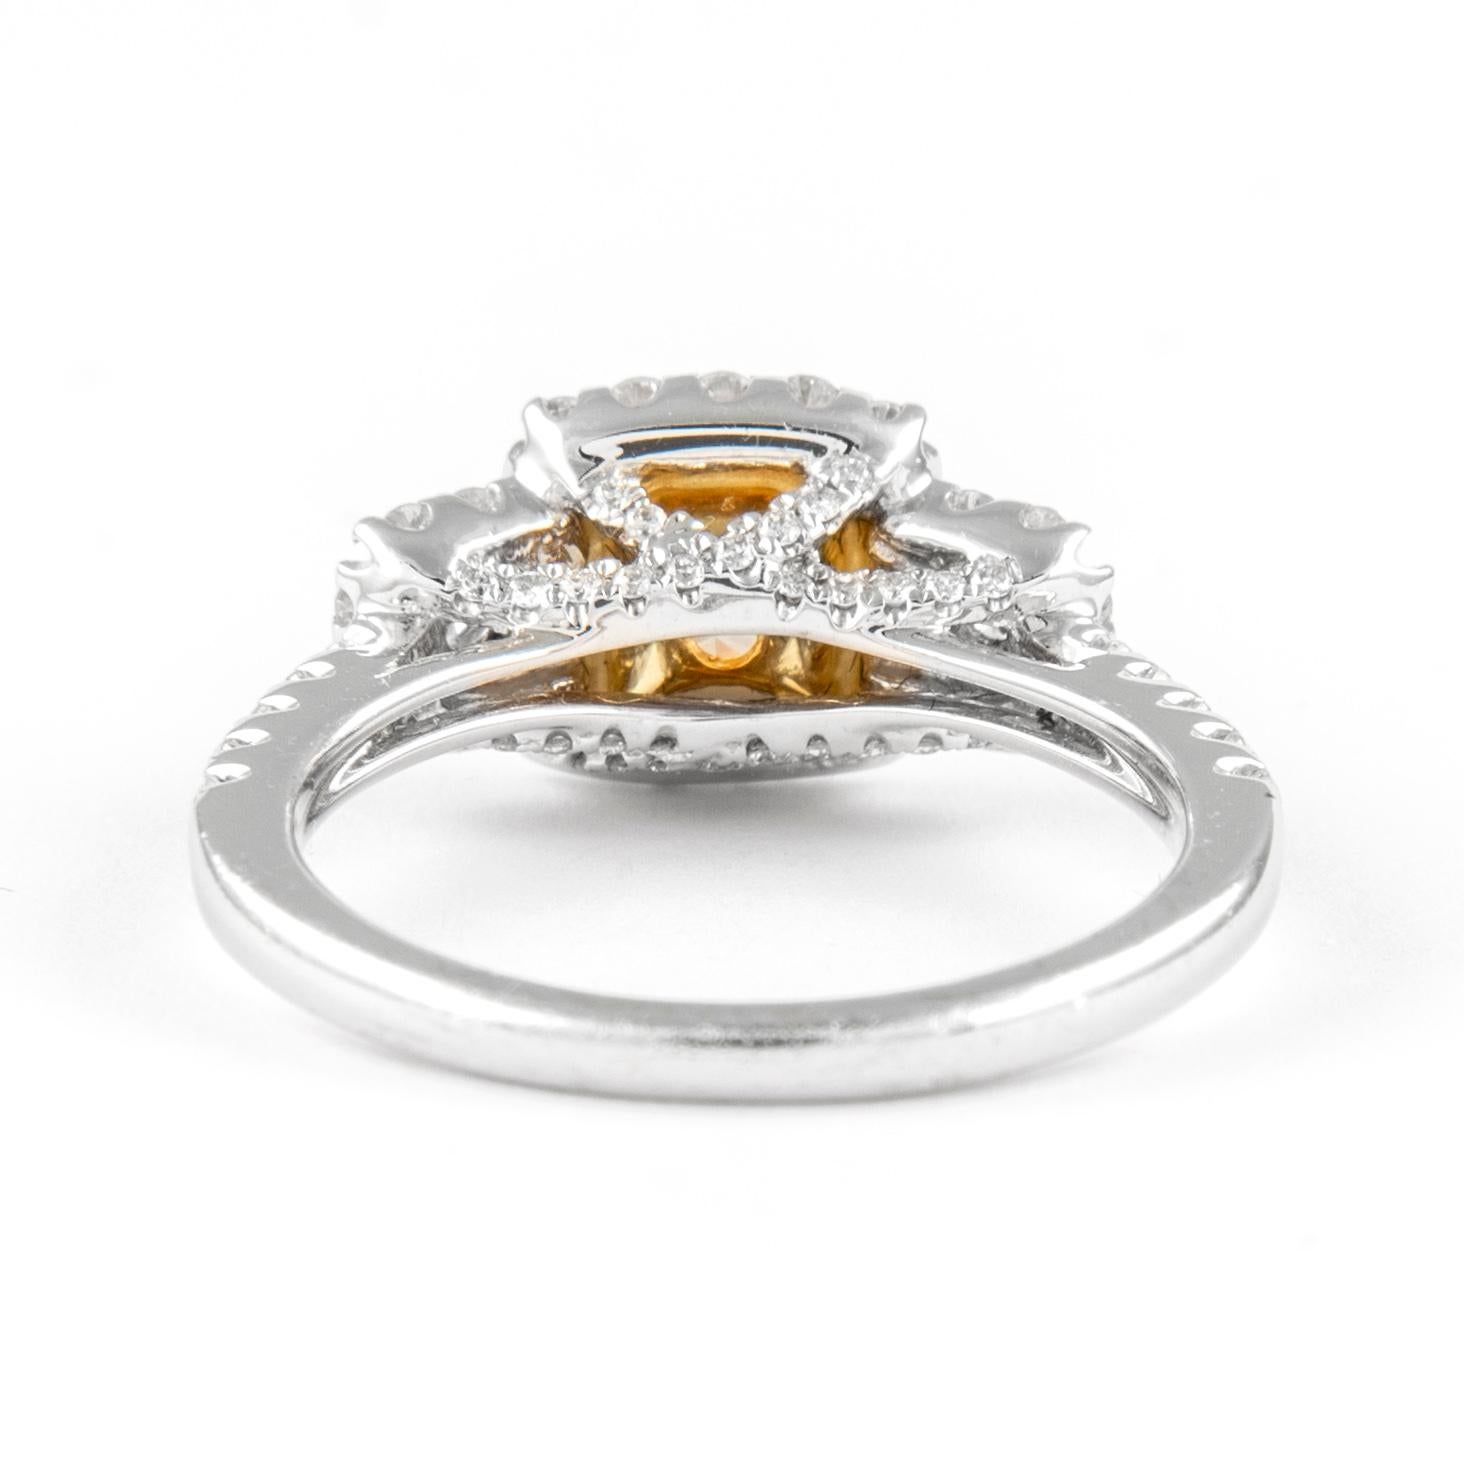 Alexander 1.63ctt Fancy Intense Yellow VS2 Diamond Three-Stone Halo Ring 18k In New Condition For Sale In BEVERLY HILLS, CA